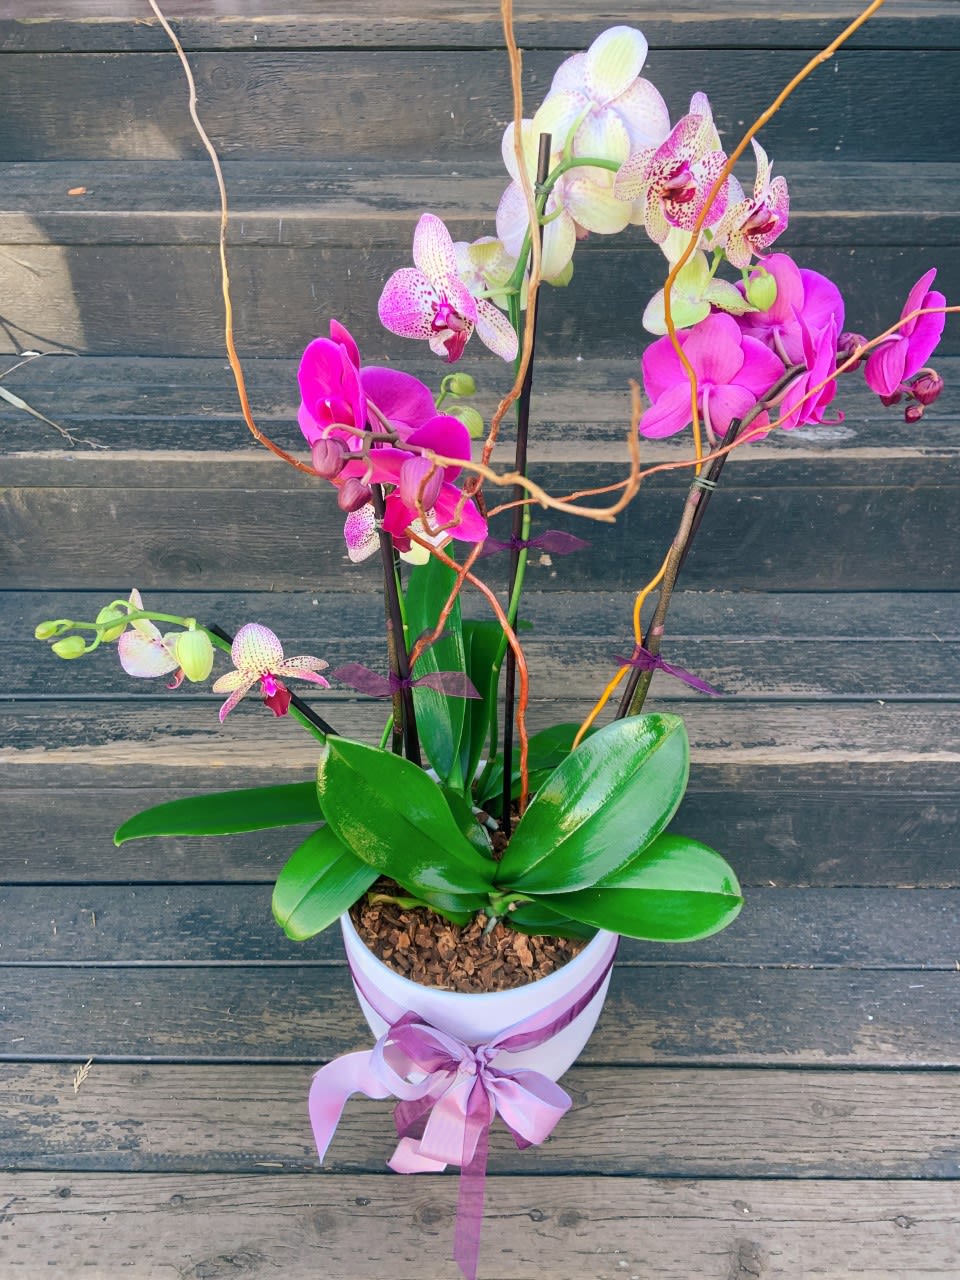 Orchids, the gift that keeps on giving!

Product used may vary